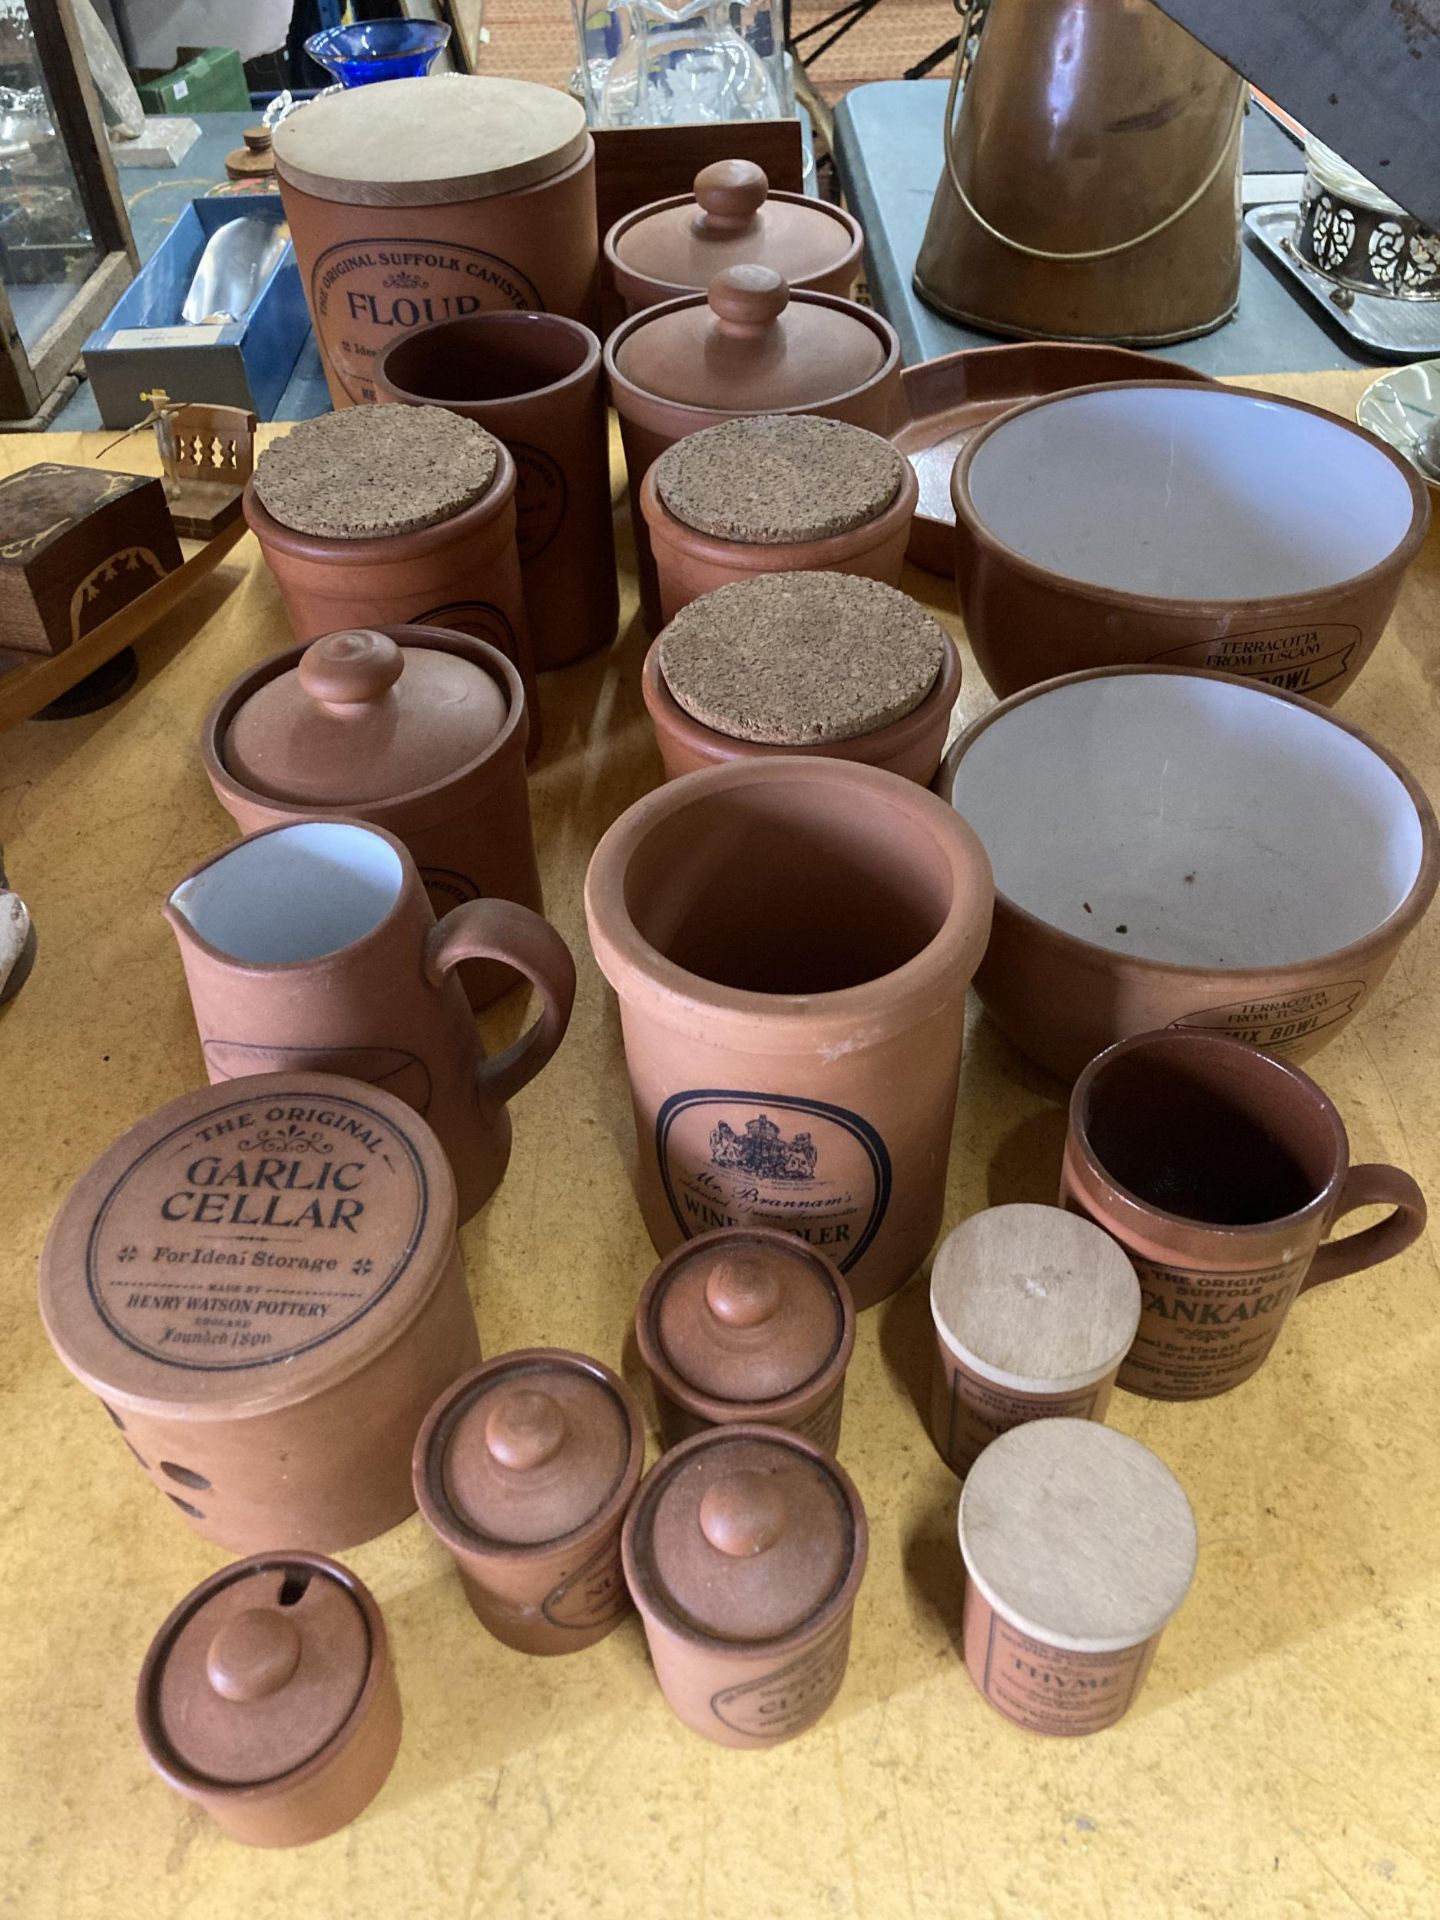 A LARGE COLLECTION OF TERRACOTTA STORAGE JARS AND BOWLS, THE MAJORITY BY HENRY WATSON POTTERY